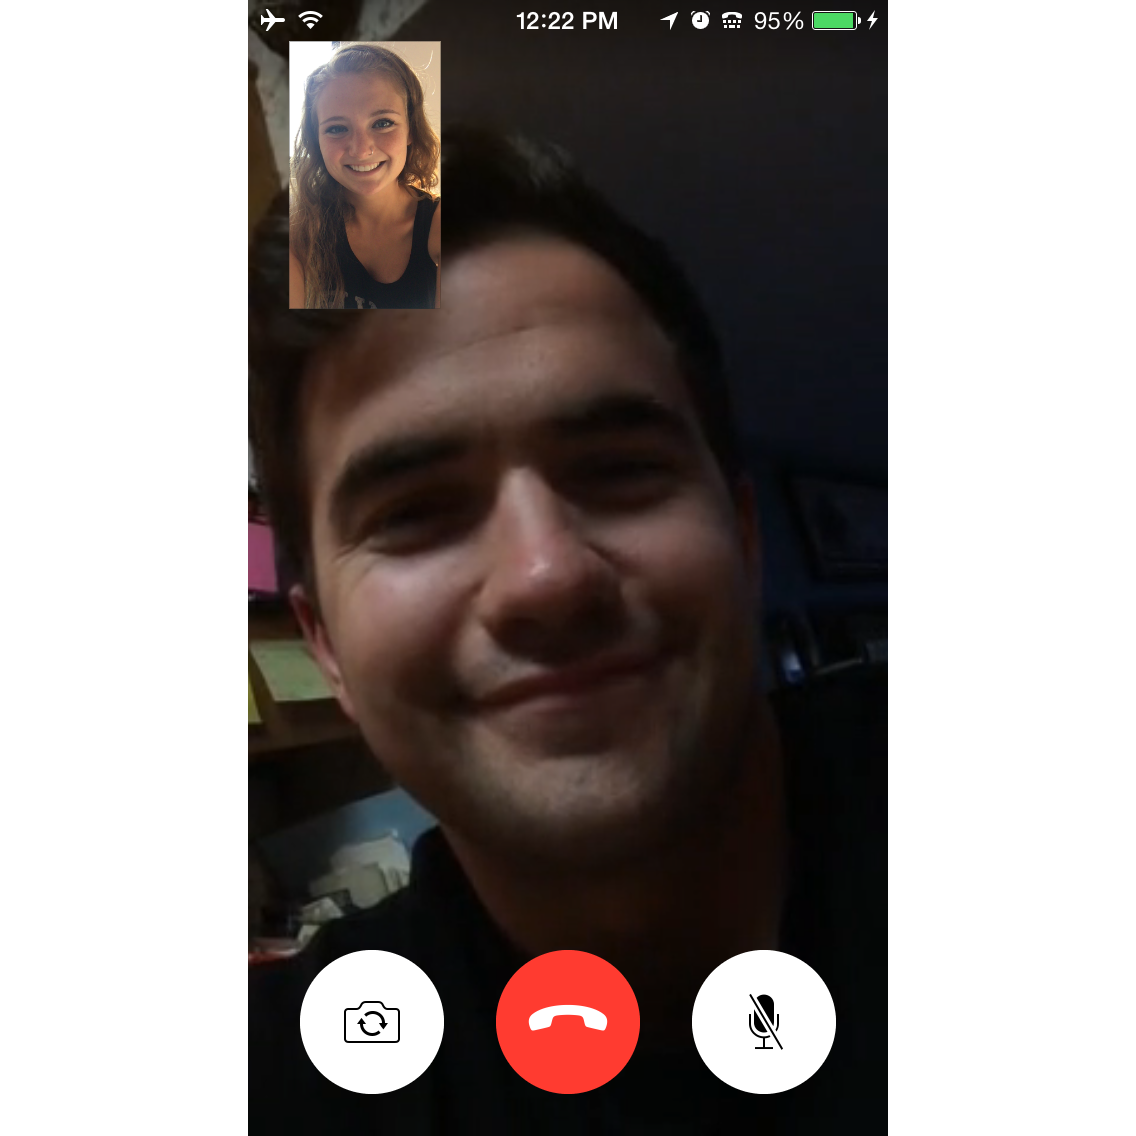 The facetime conversation that Kaleb told Tessa he bought a plane ticket and was coming to see her in New Zealand, 2015